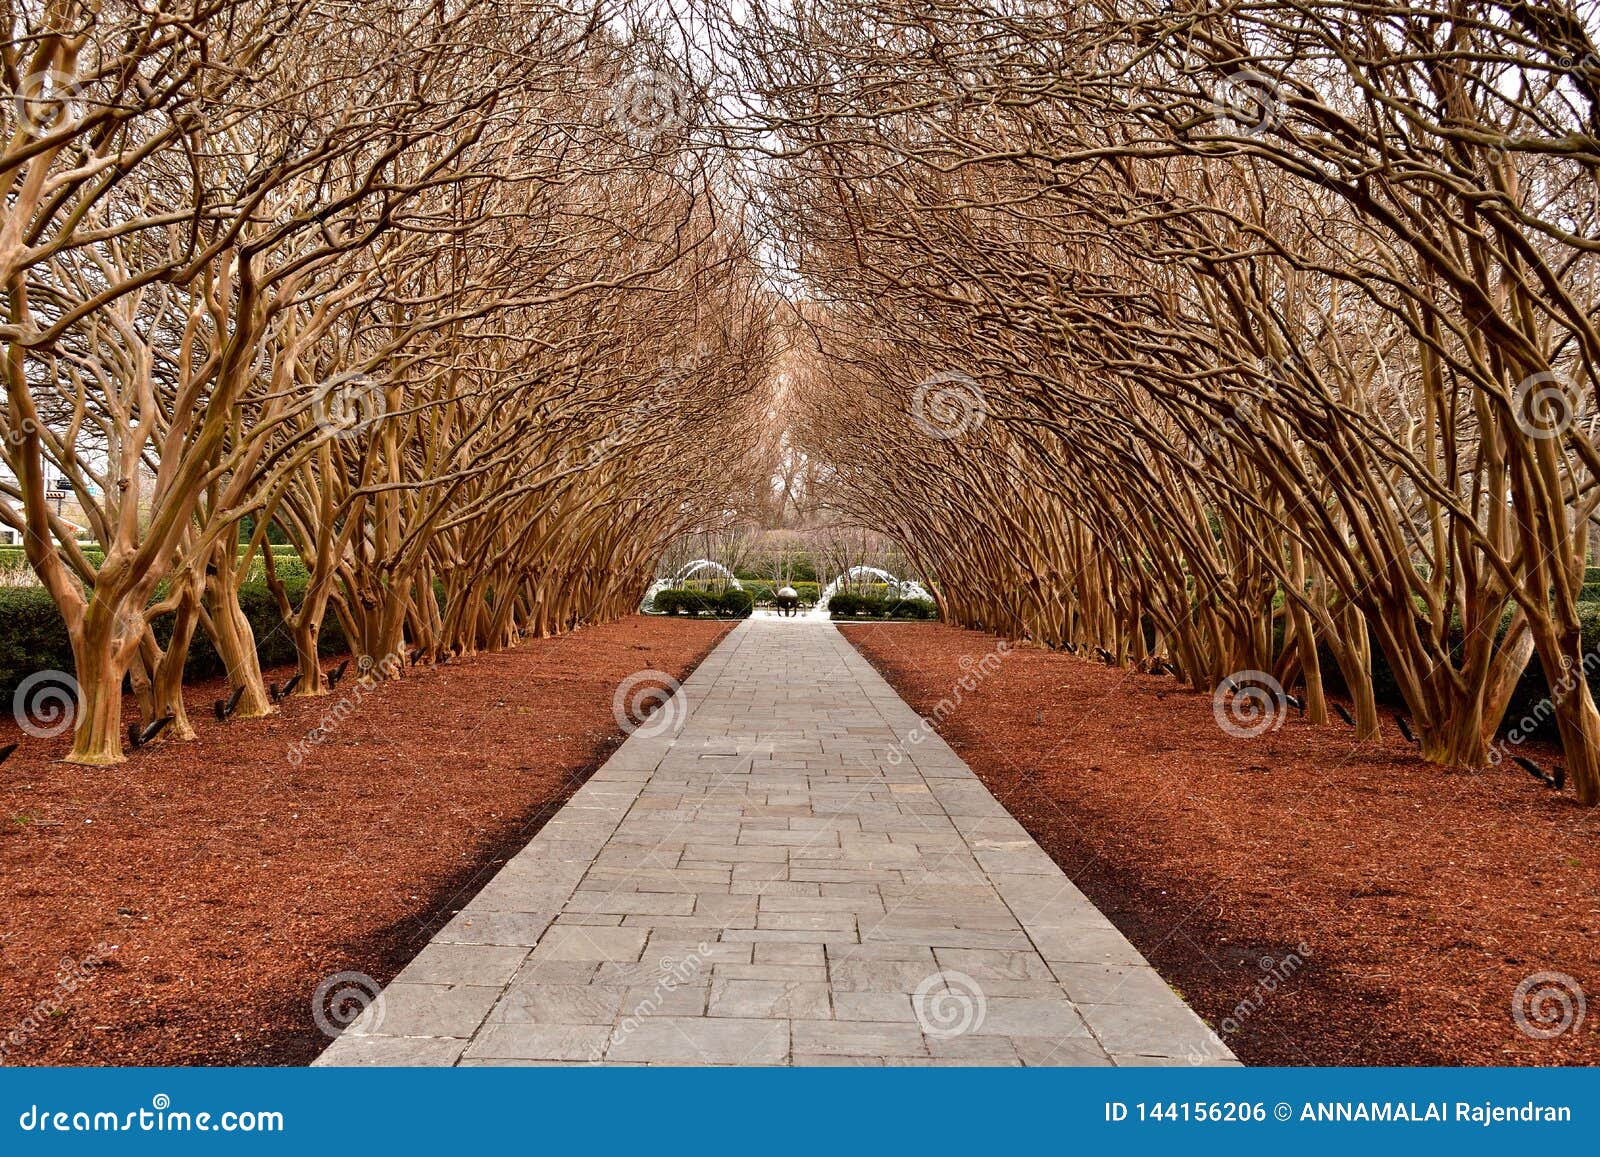 trees on paved pathway